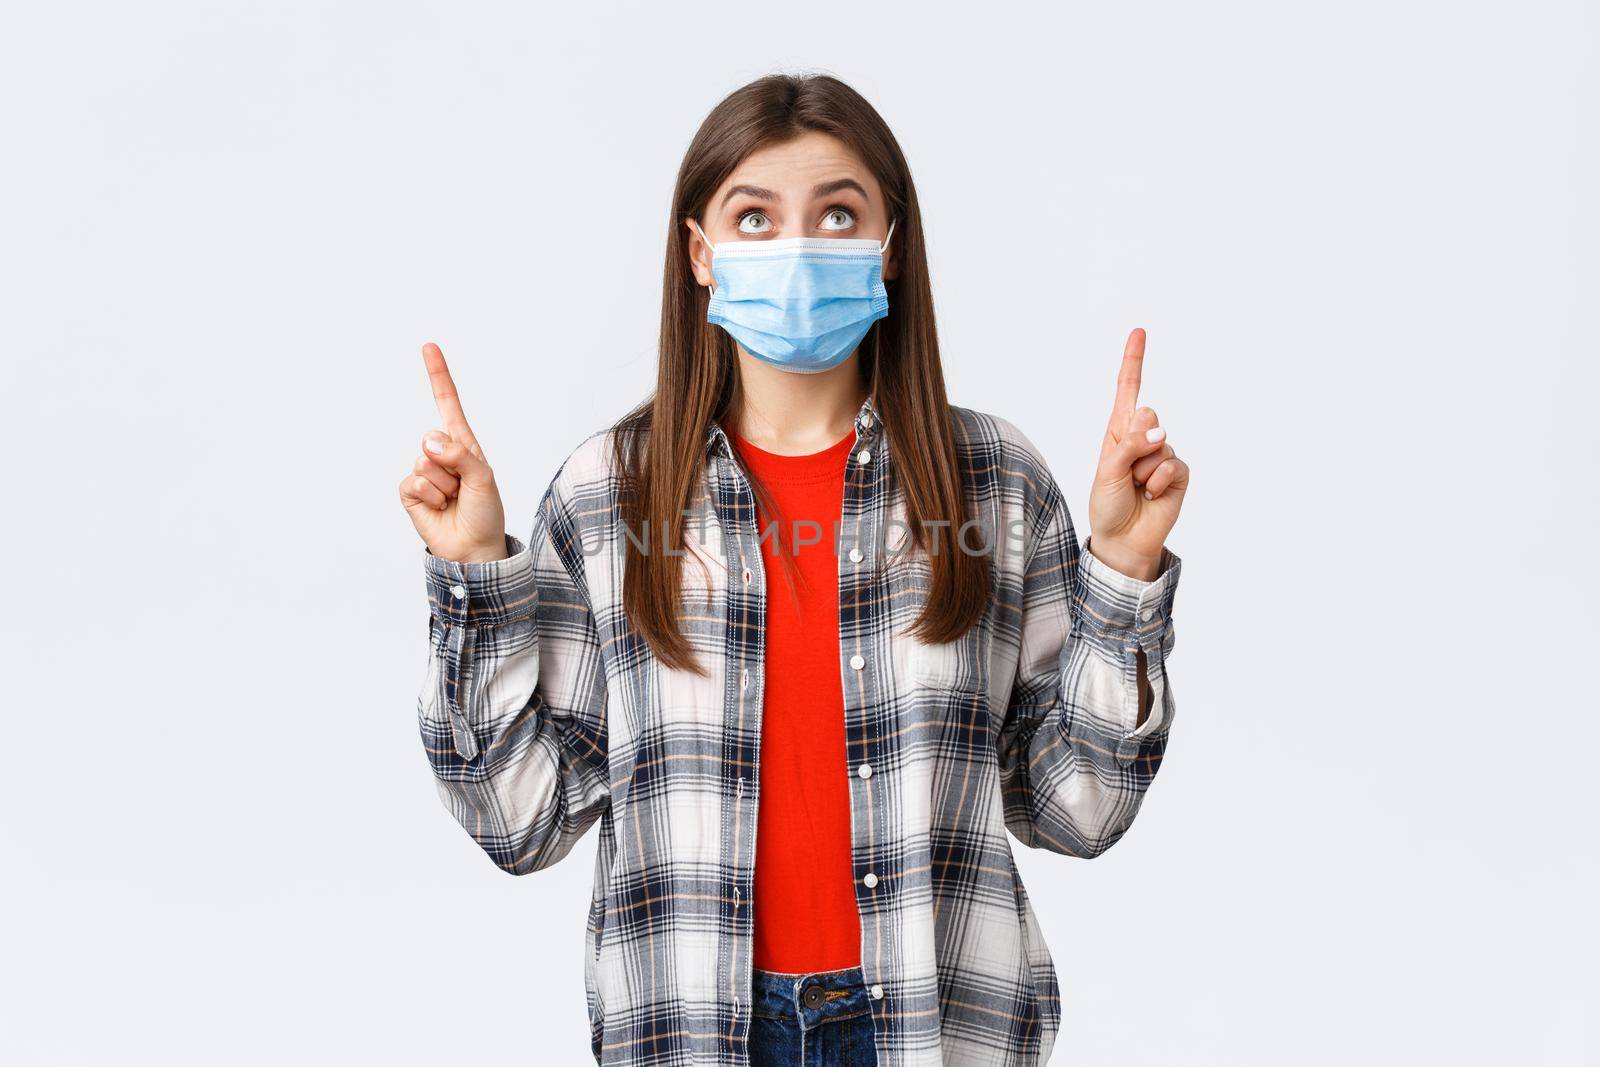 Coronavirus outbreak, leisure on quarantine, social distancing and emotions concept. Surprised and interested cute caucasian girl in casual outfit and medical mask, reading sign upwards, point up by Benzoix